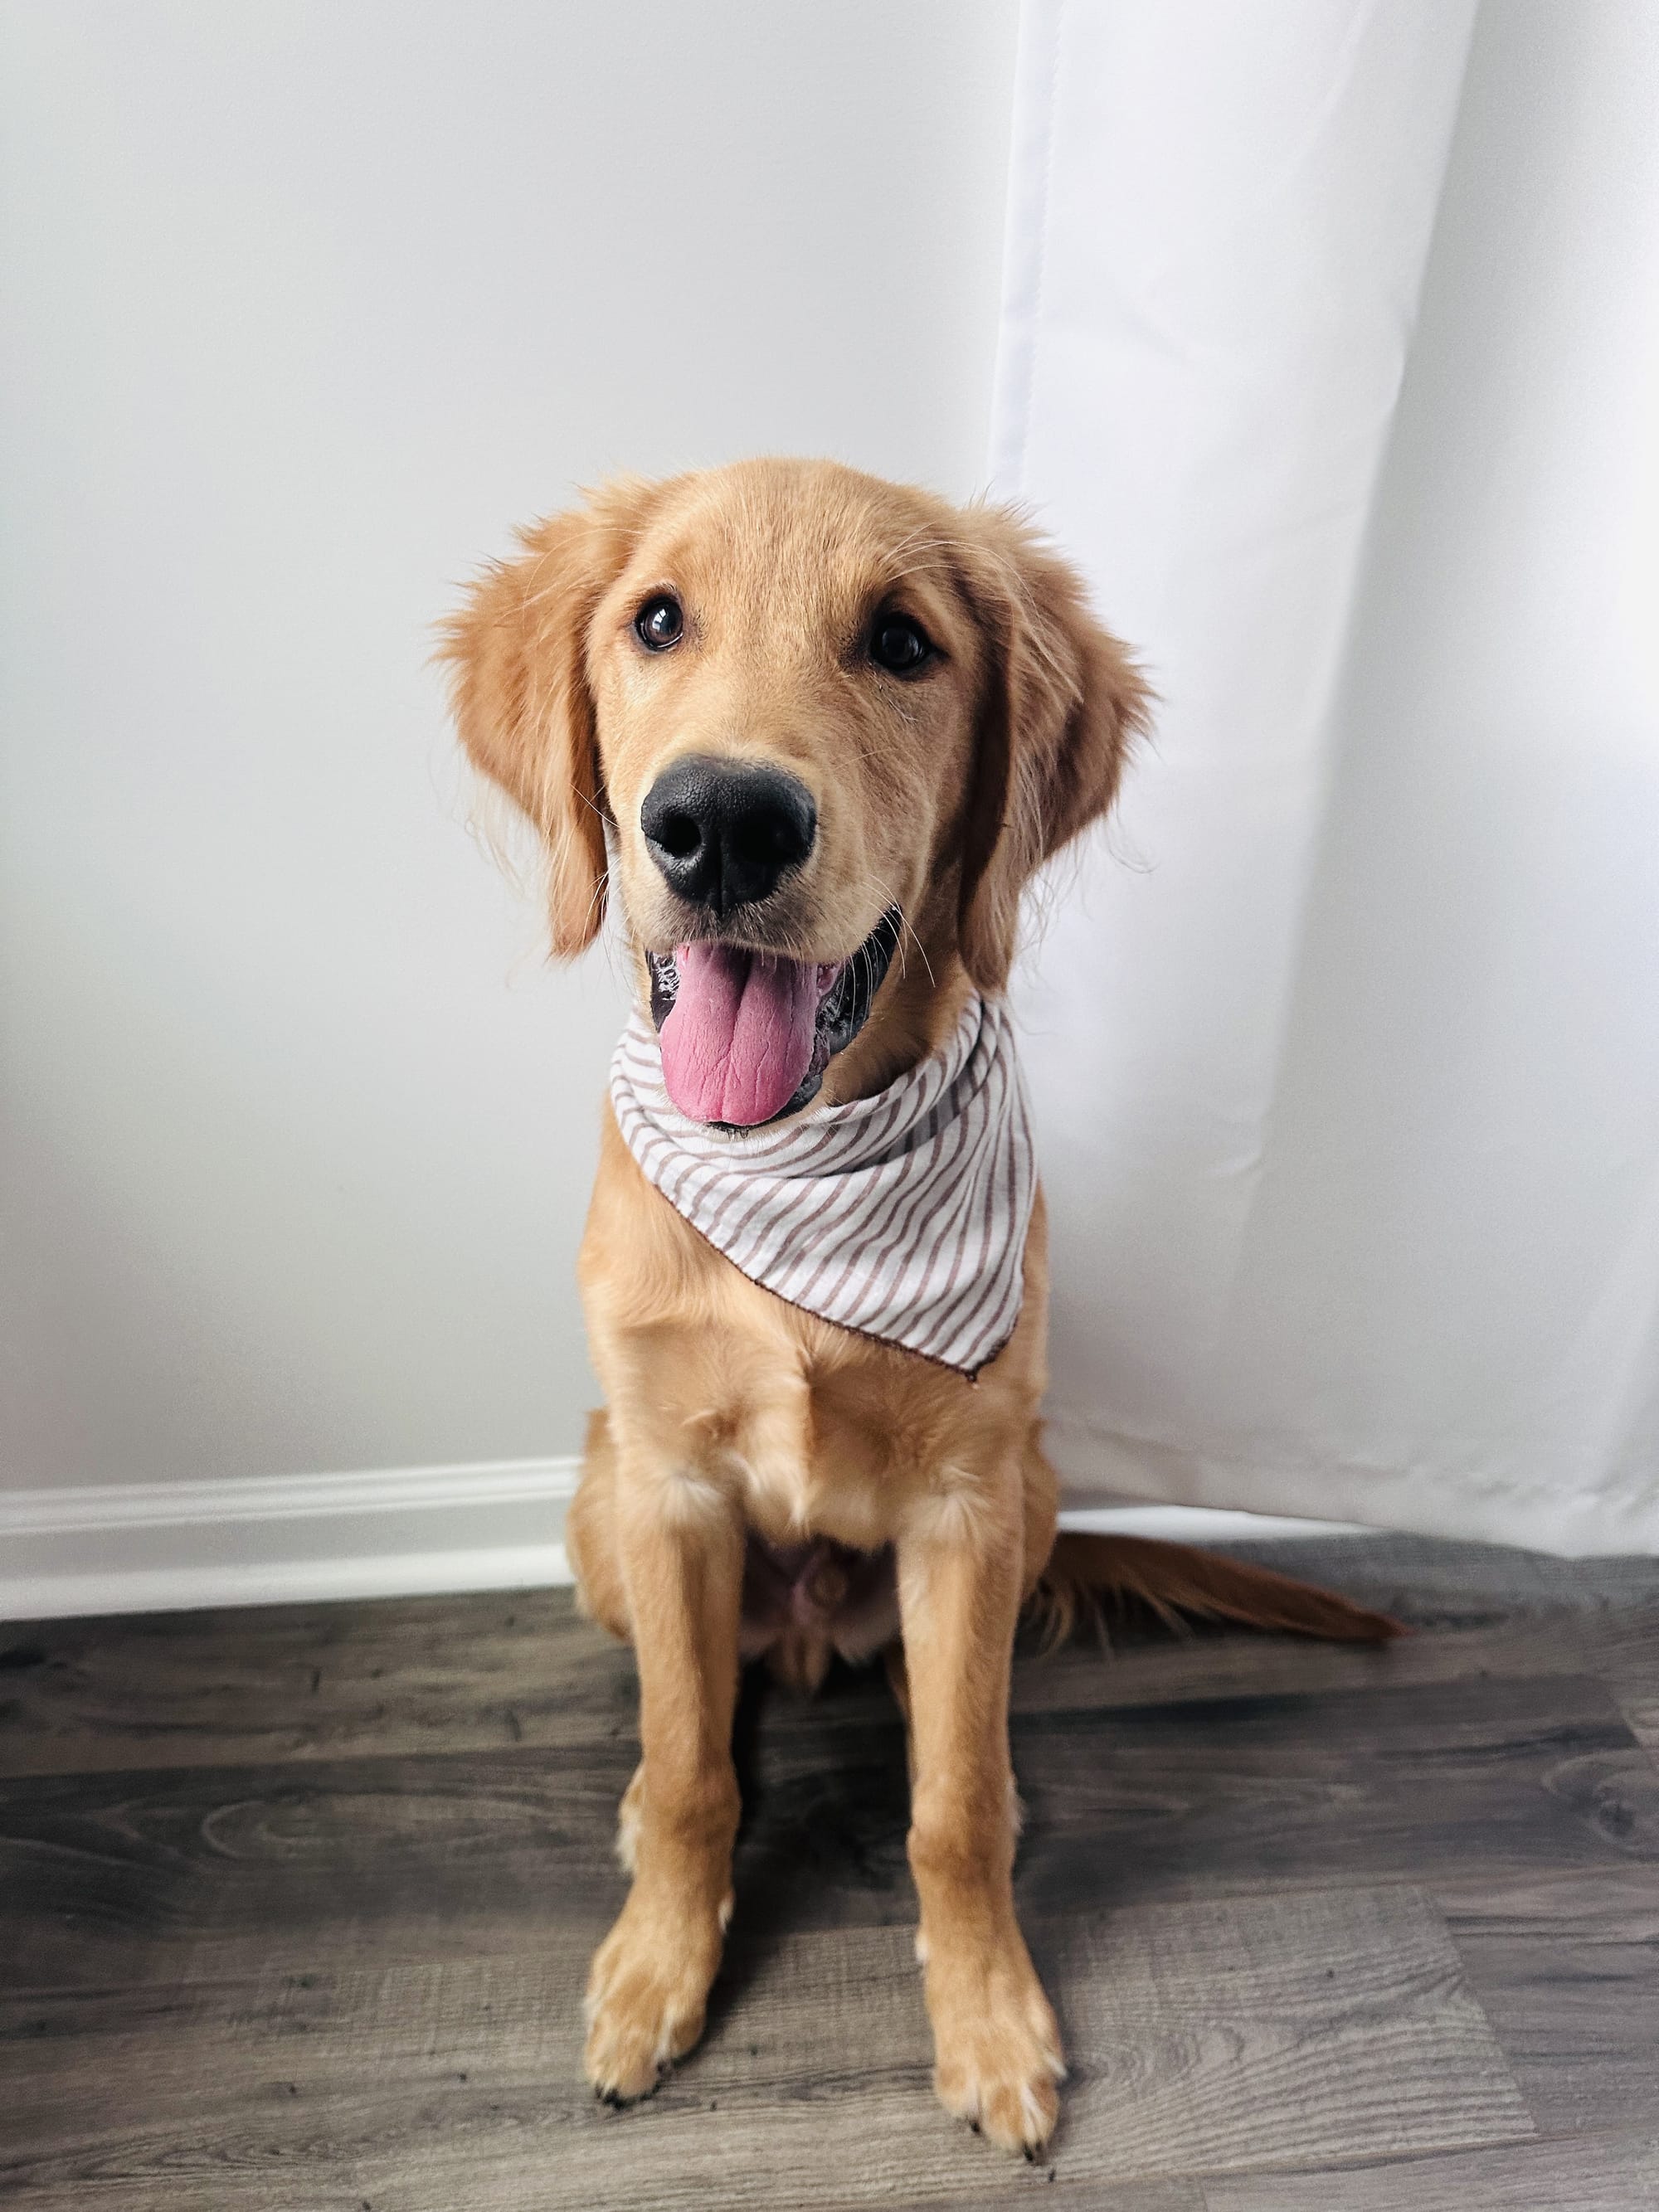 DOGFLUENCERS: Meet Camper, The Pup Who Brings Tons Of Joy